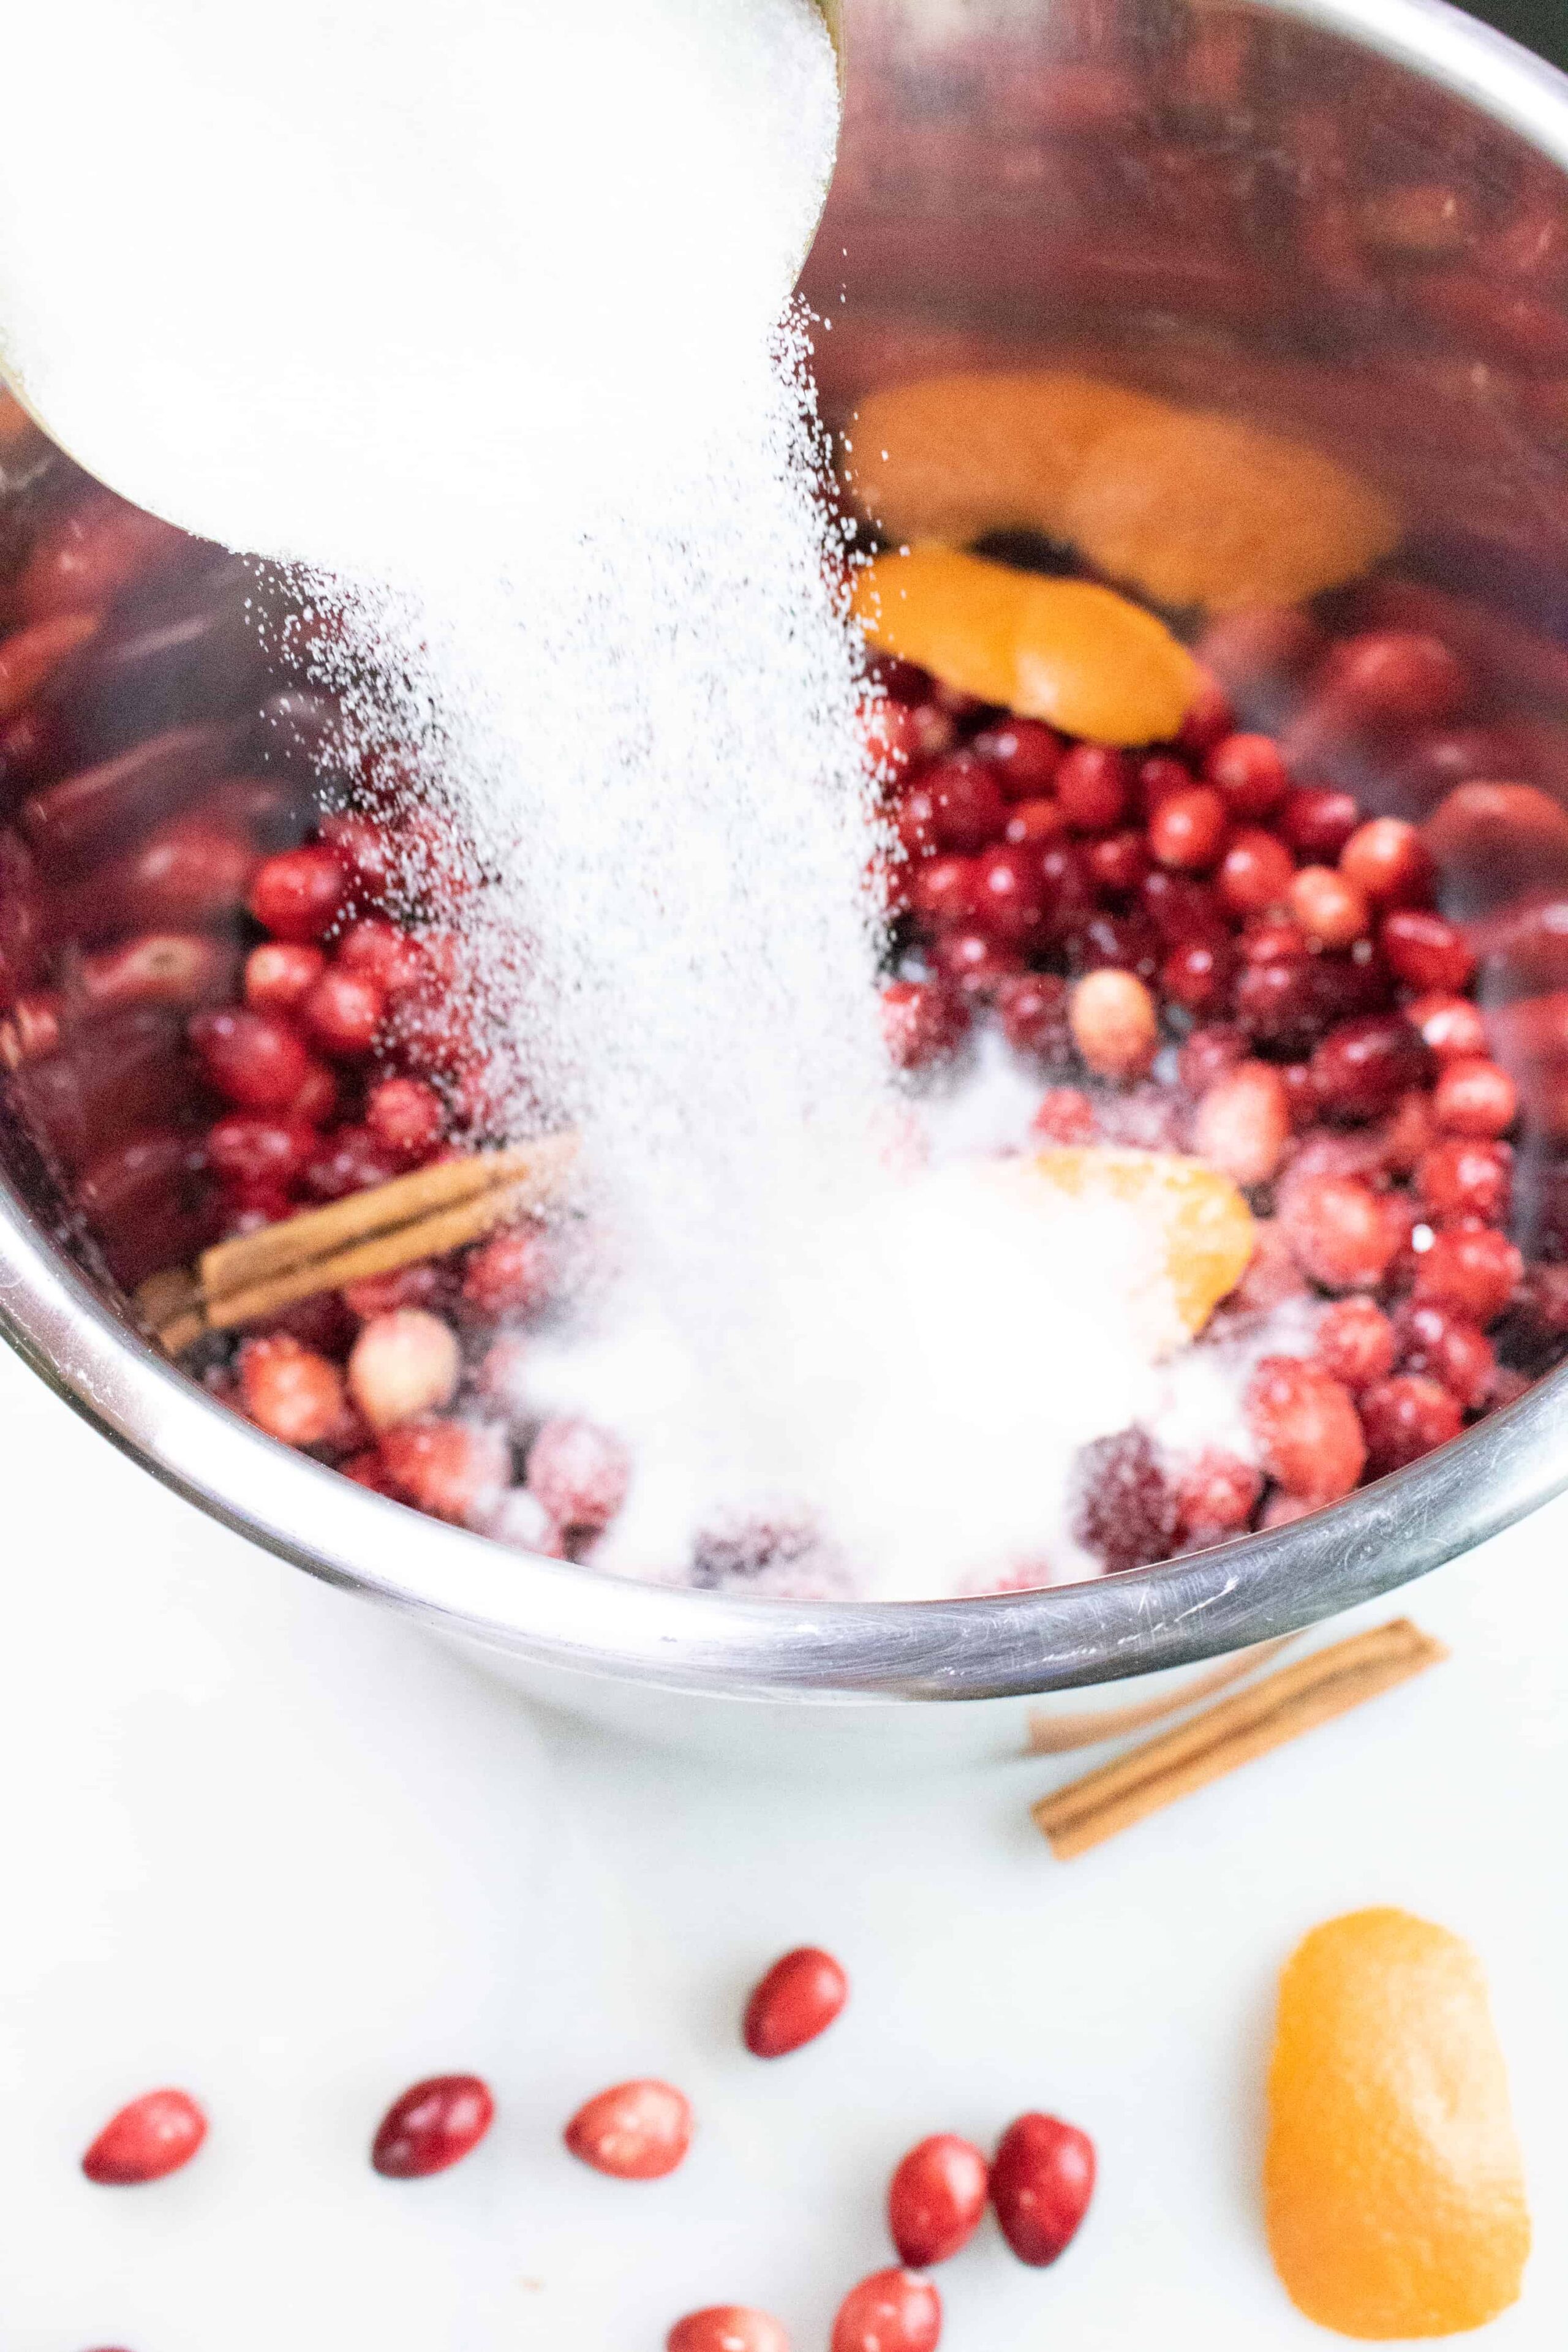 Ingredients for Instant Pot Cranberry Sauce being added to the Instant Pot inner pot